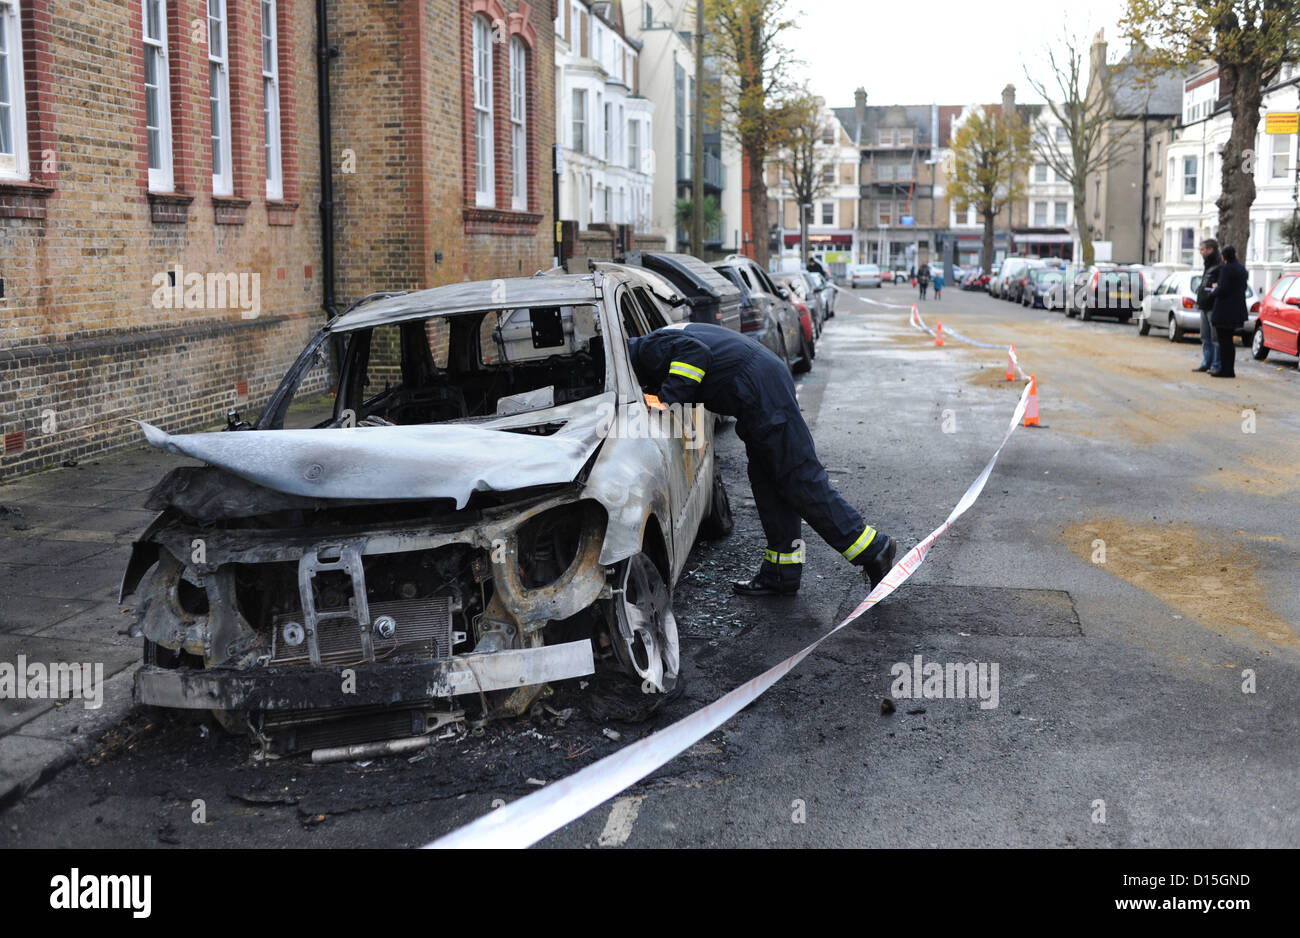 A Fire Investigation Officer checks out the burnt out cars in Connaught Road Hove this morning .  Brighton Sussex UK 2012 Stock Photo